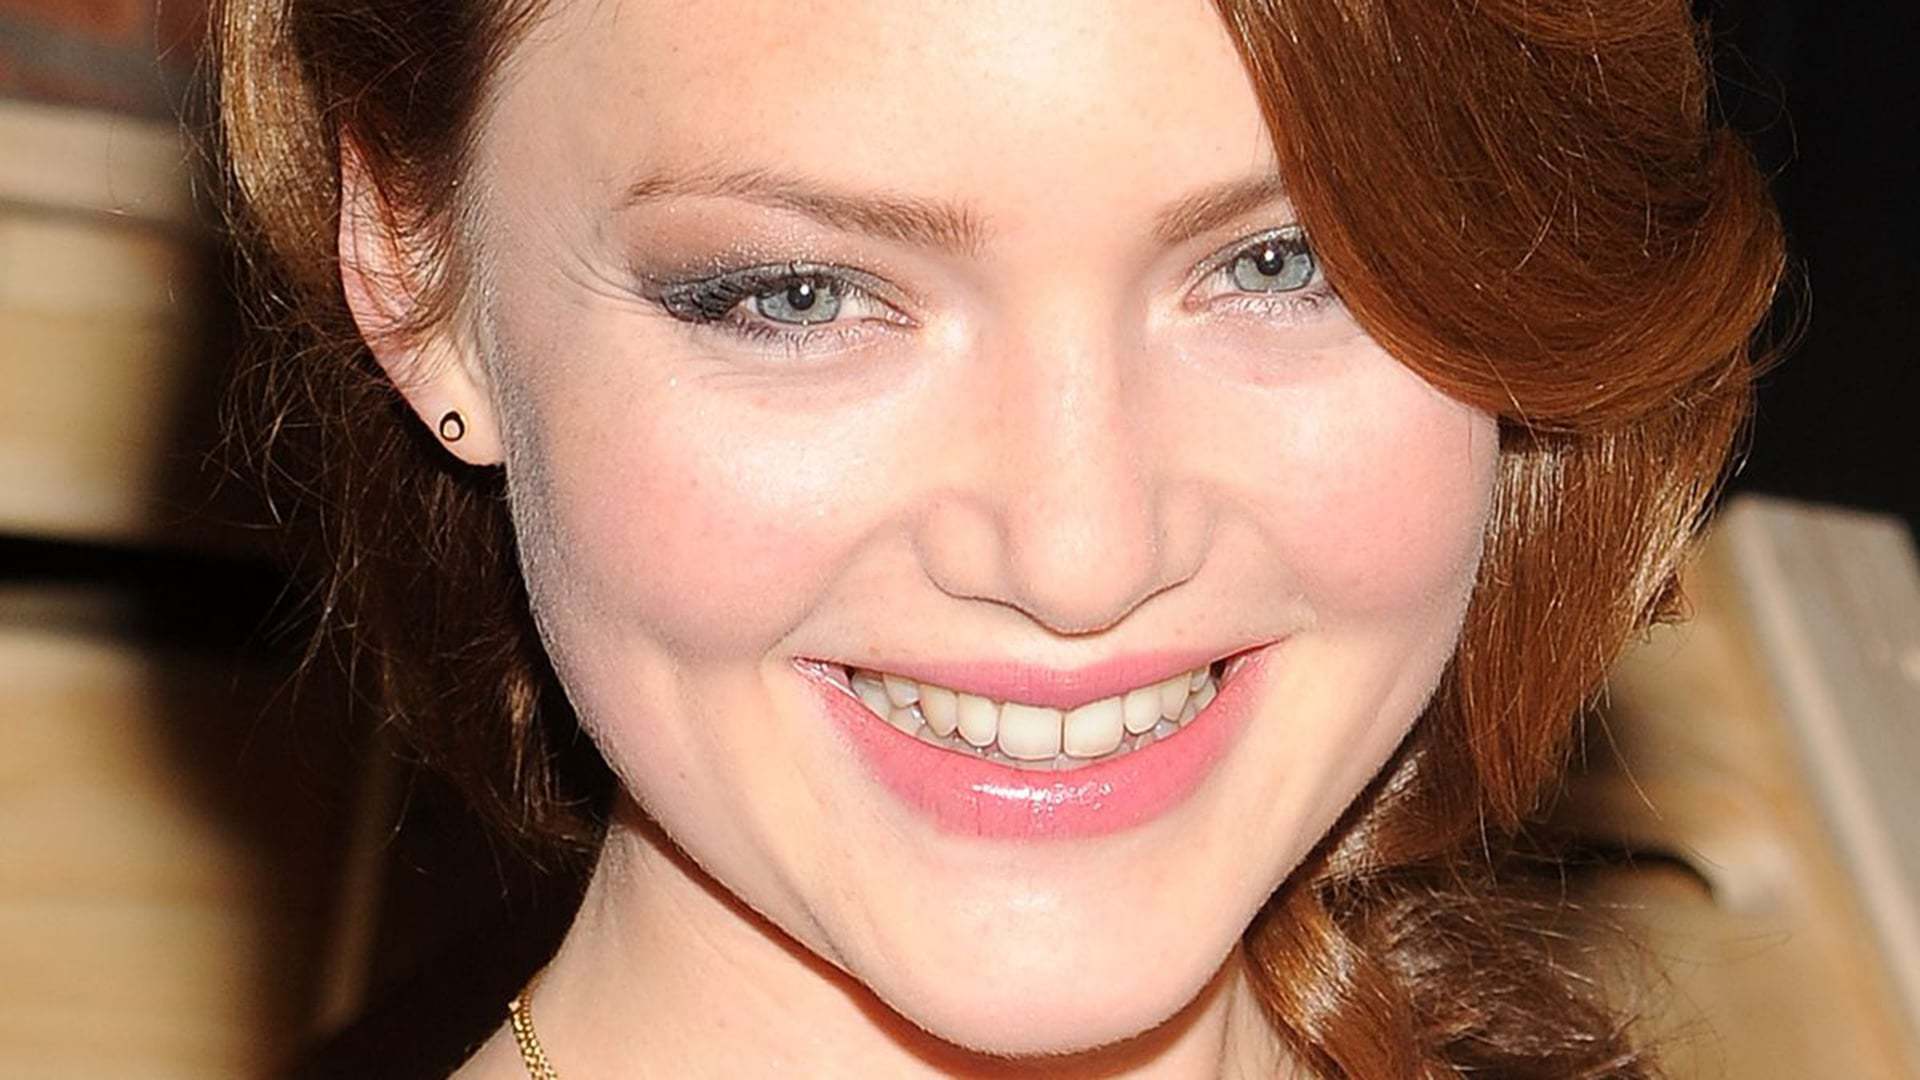 Holliday Grainger Plastic Surgery – Before and After. Botox, Lips, Nose Job, and More!